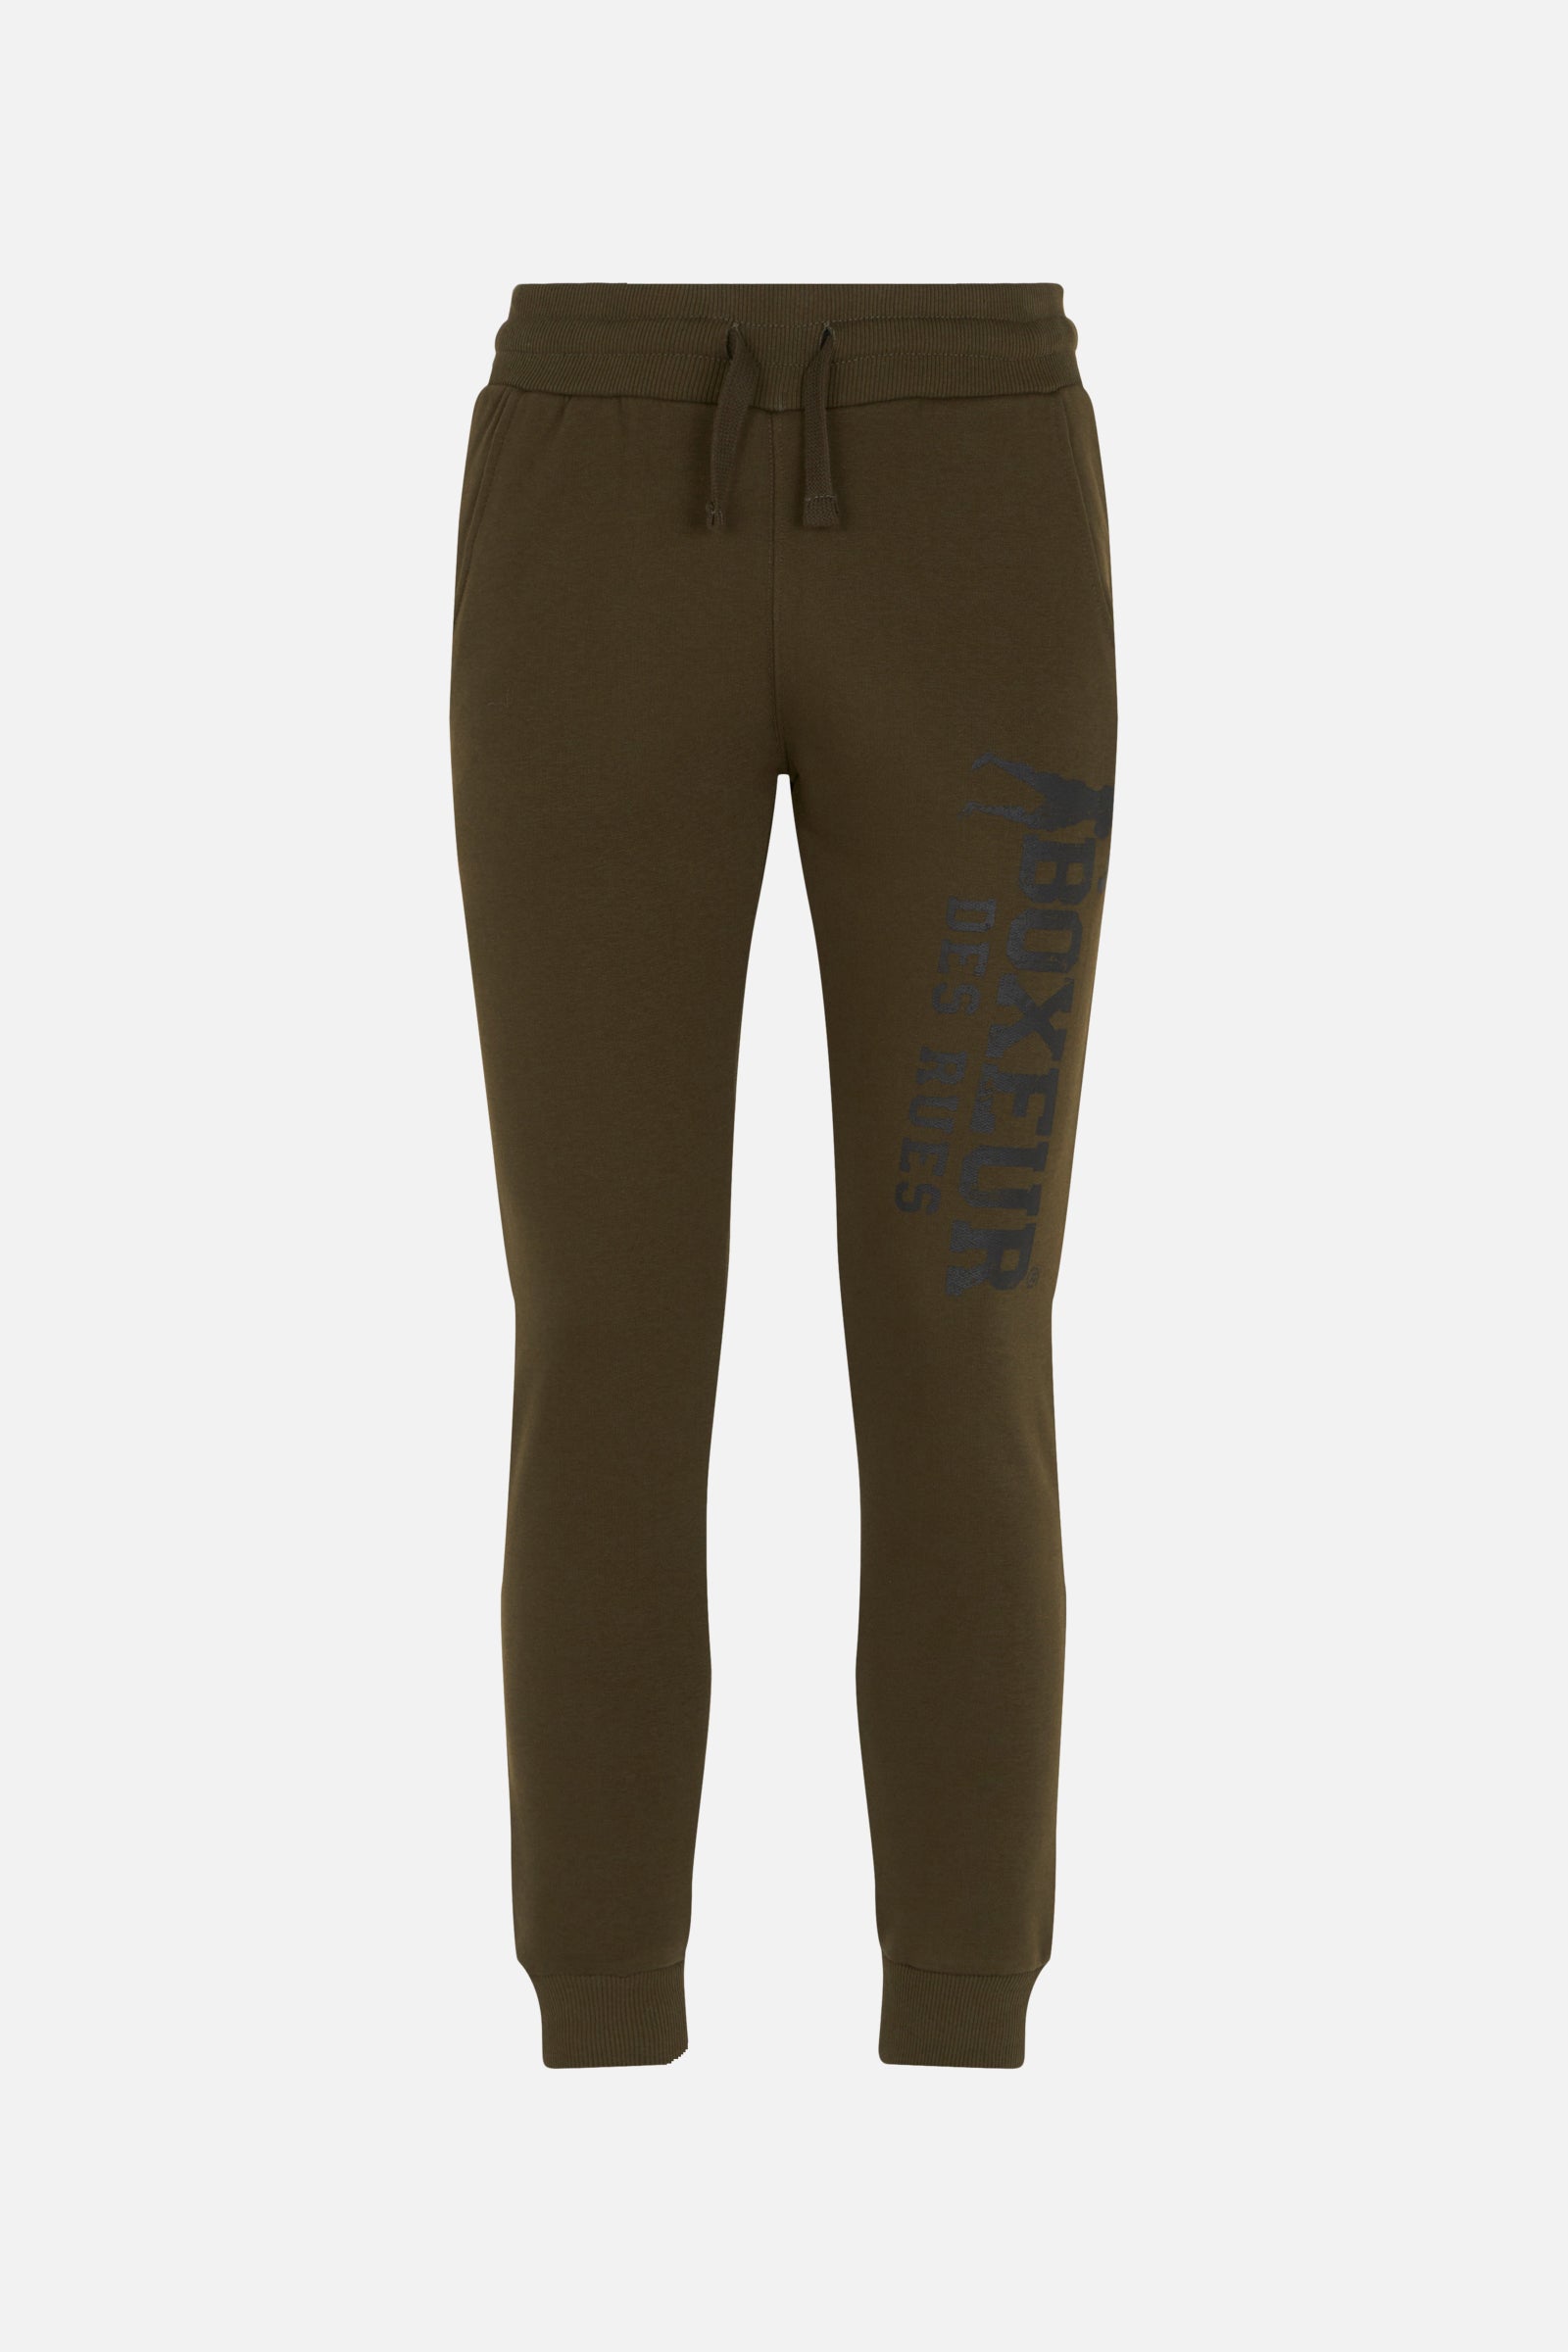 Slim Fit Sweatpant With Logo in Army Hosen Boxeur des Rues   